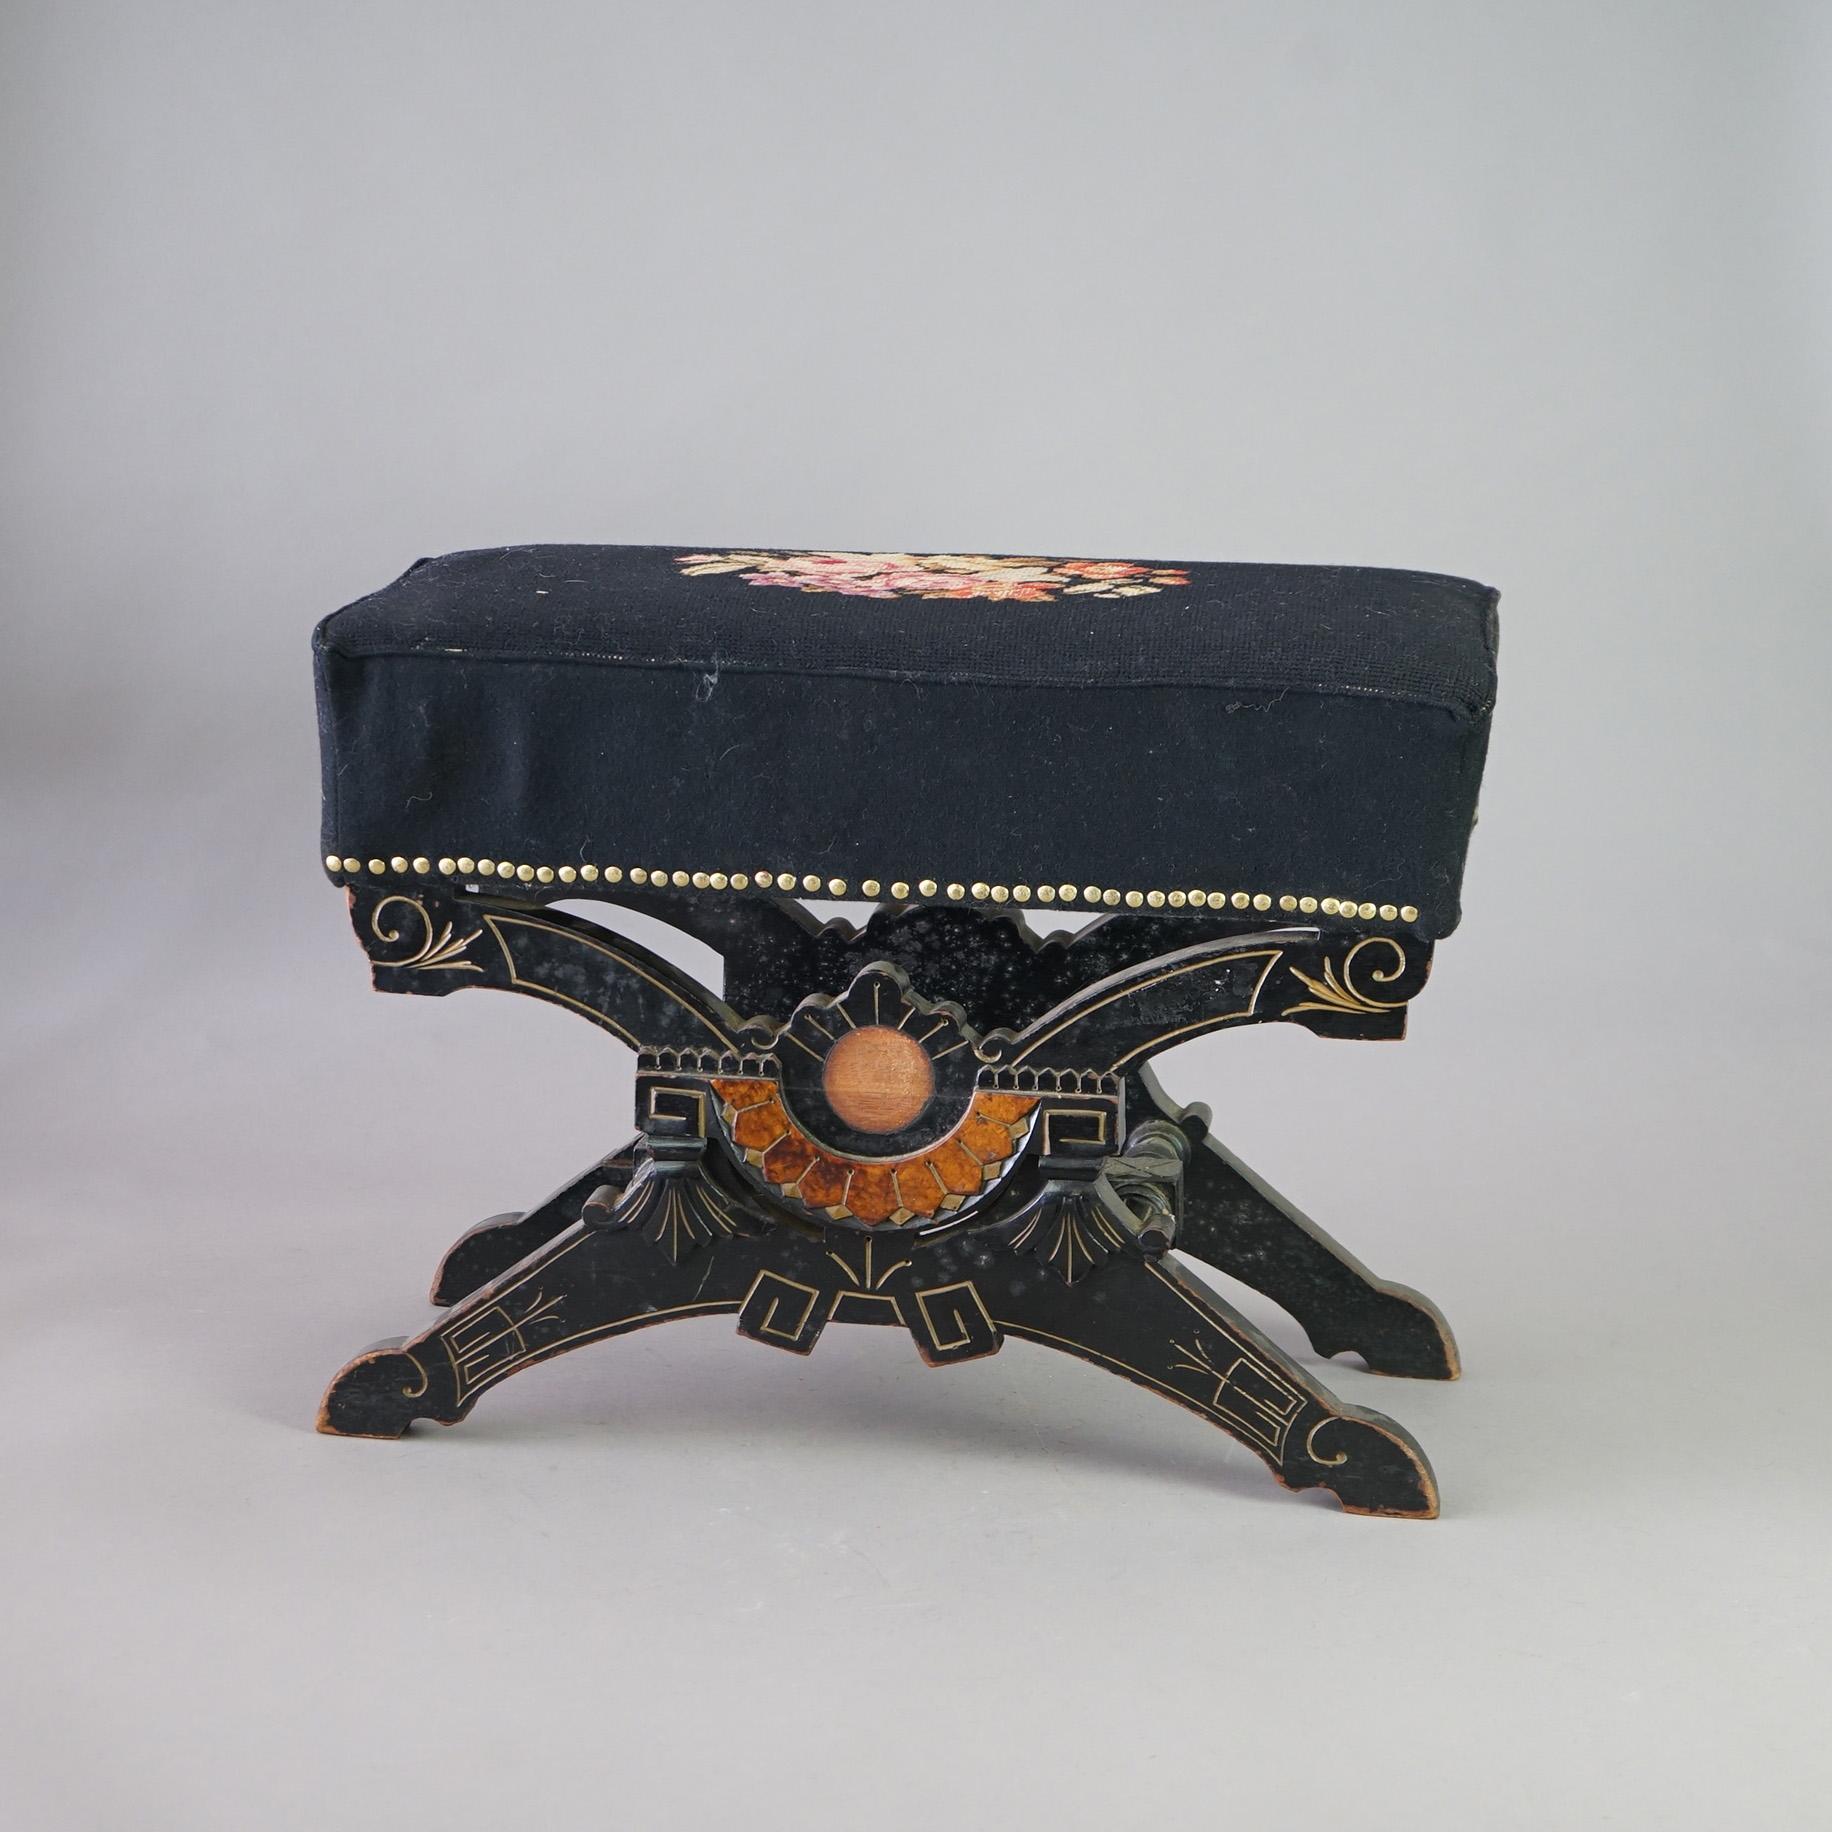 An antique footstool iin the manner of John Jelliff offers needlepoint seat over ebonized base having carved foliate elements and incised decoration with gilt highlights, c1890
Style Ebonized And Gilt Needlepoint Footstool C1890
No label

Measures-